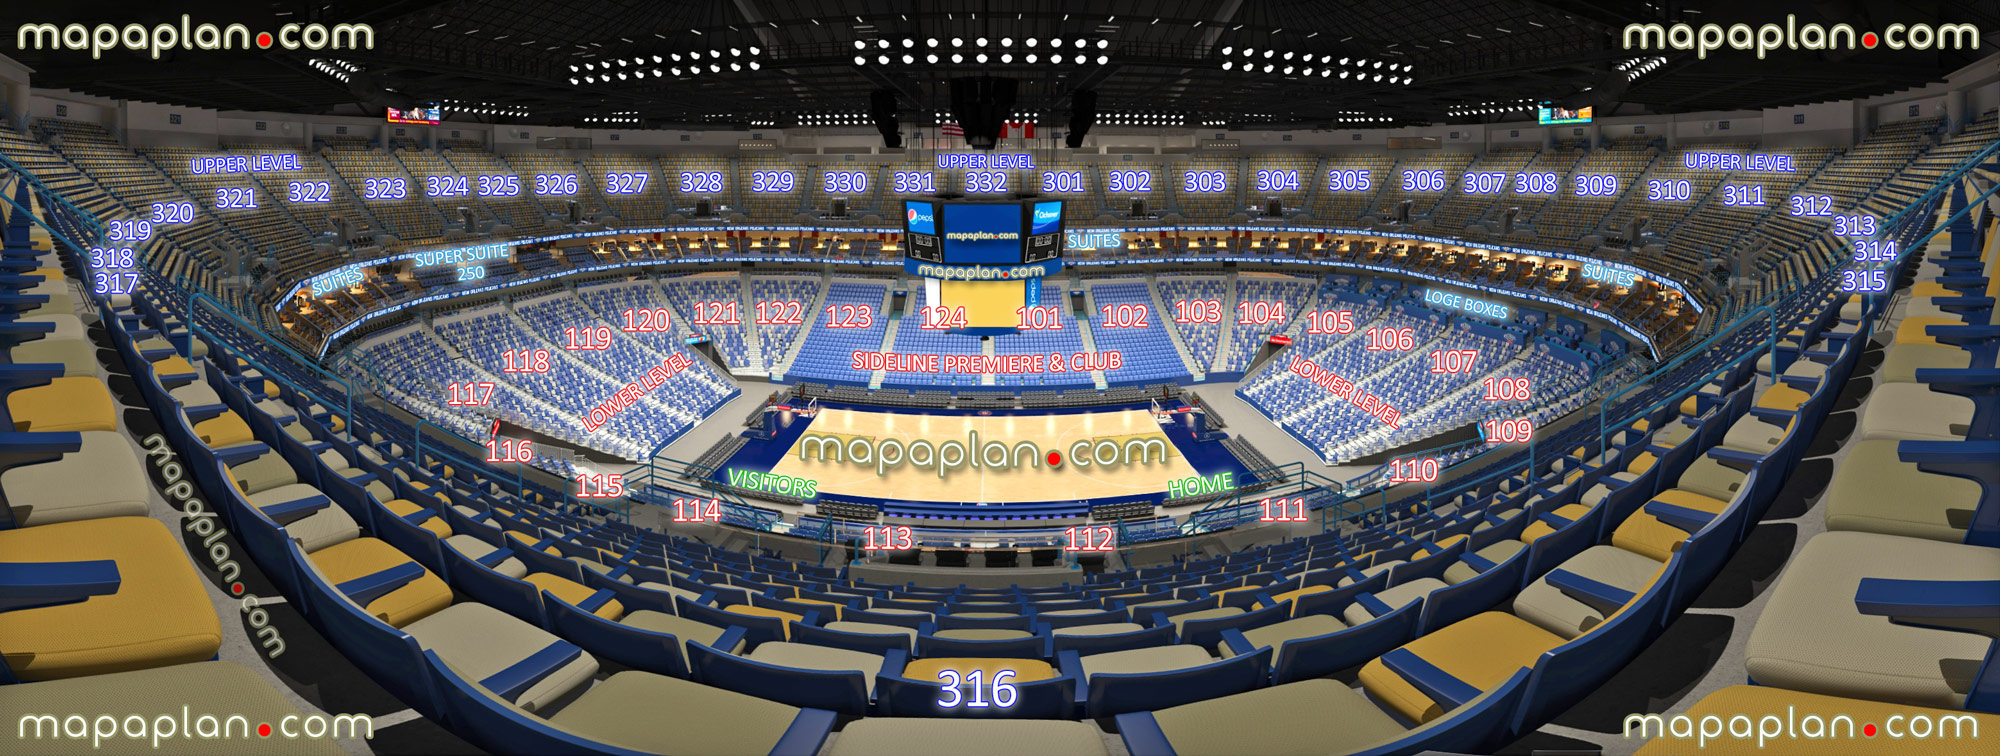 view section 316 row 14 seat 8 pelicans hornets basketball arrangement virtual interactive viewer view photo review interior guide club seats lower upper level hub international hub club super suite loge balcony boxes New Orleans Smoothie King Center arena seating chart